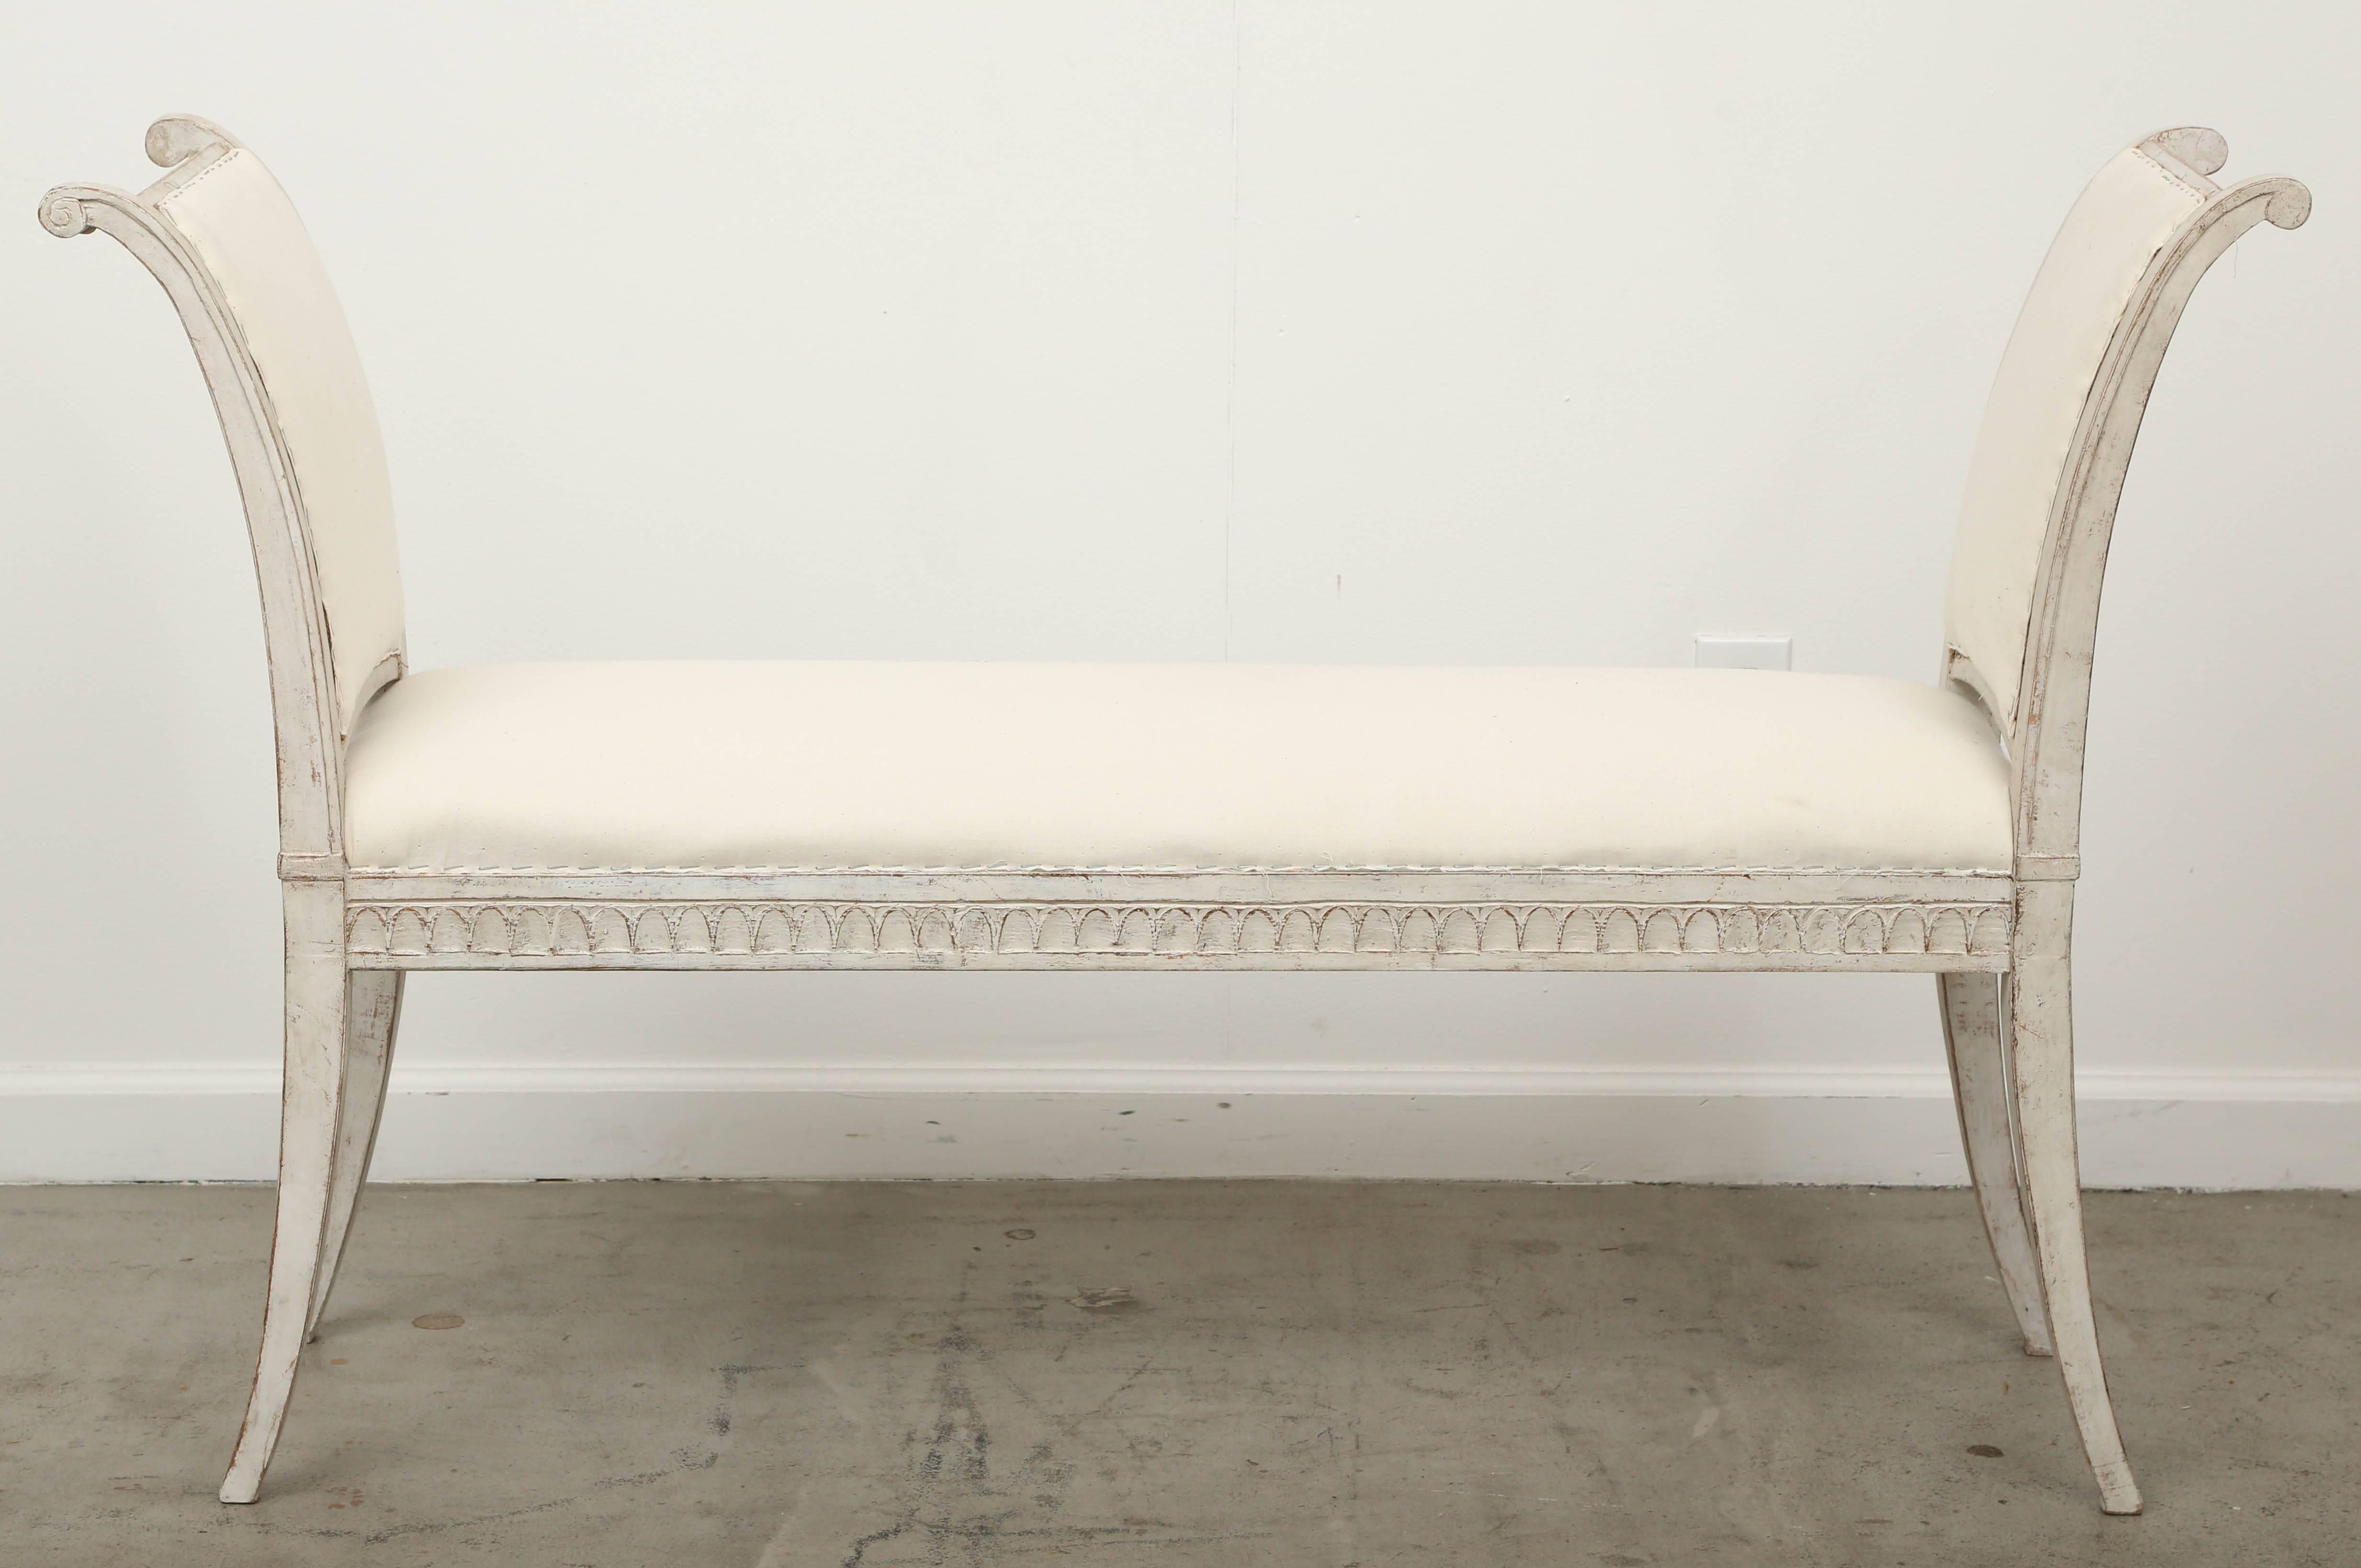 Pair of antique Swedish Gustavian benches with curved arms, mid-19th century.
Very graceful long benches with arched carved arms, lambs tongue border around base of upholstery, square curved, tapered legs. Swedish distressed matte gray-white paint